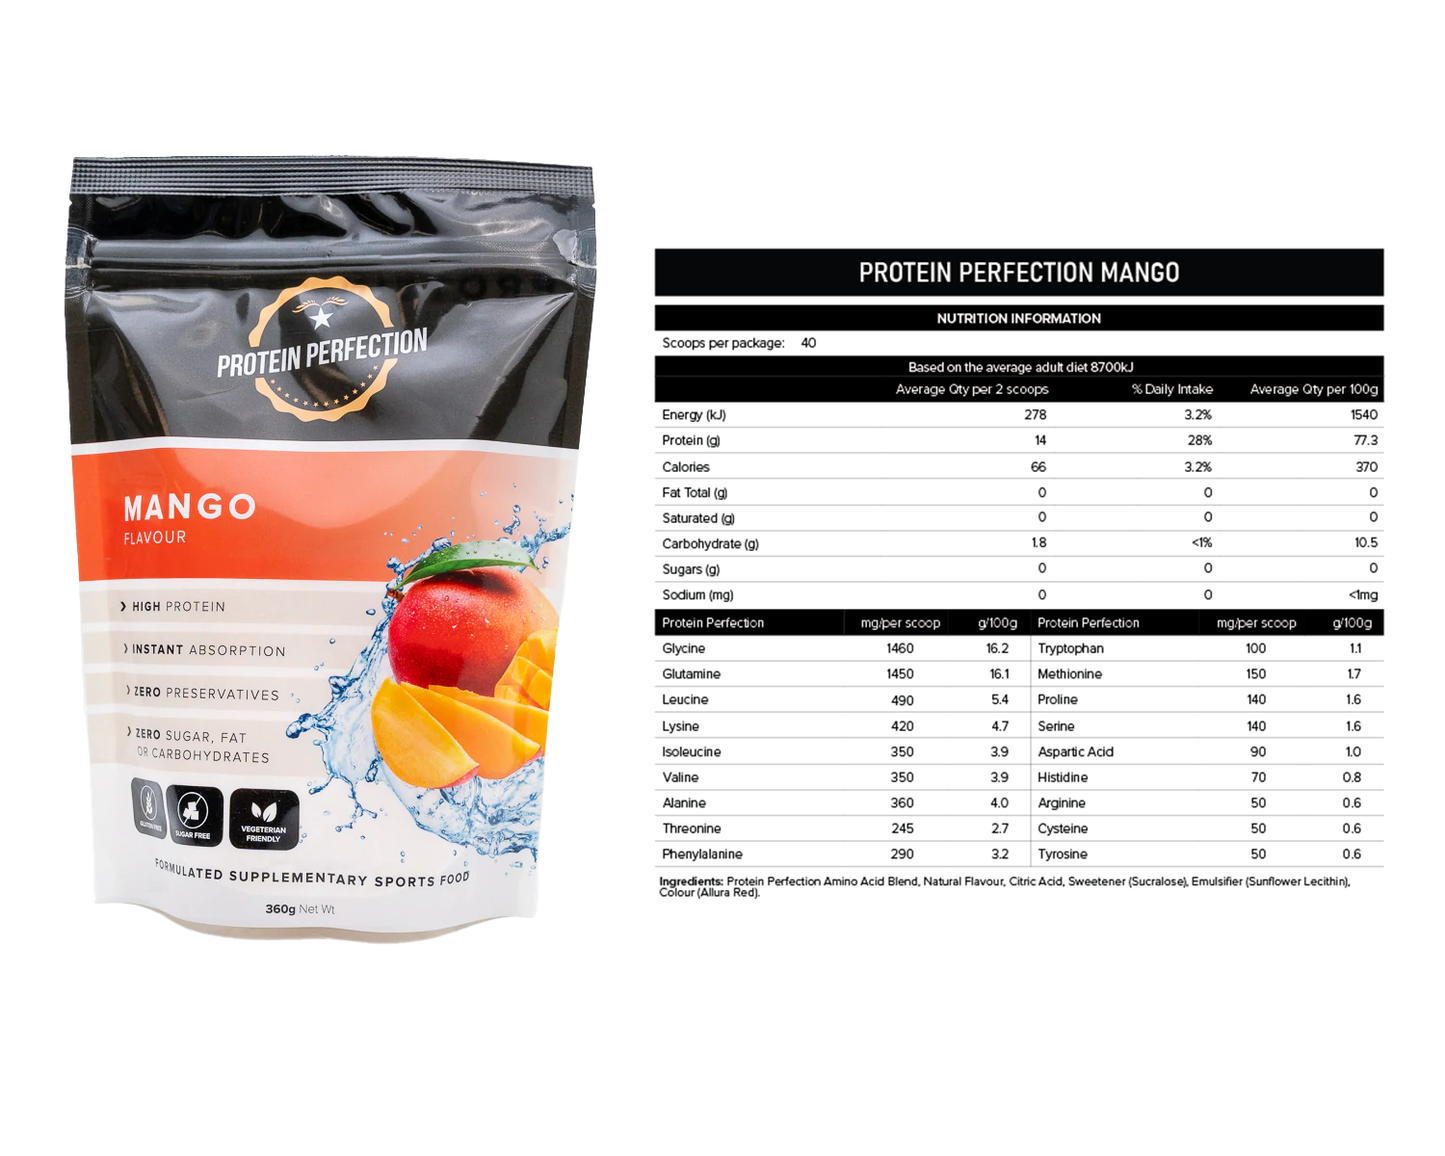 Protein Perfection - "Protein Water" Bag